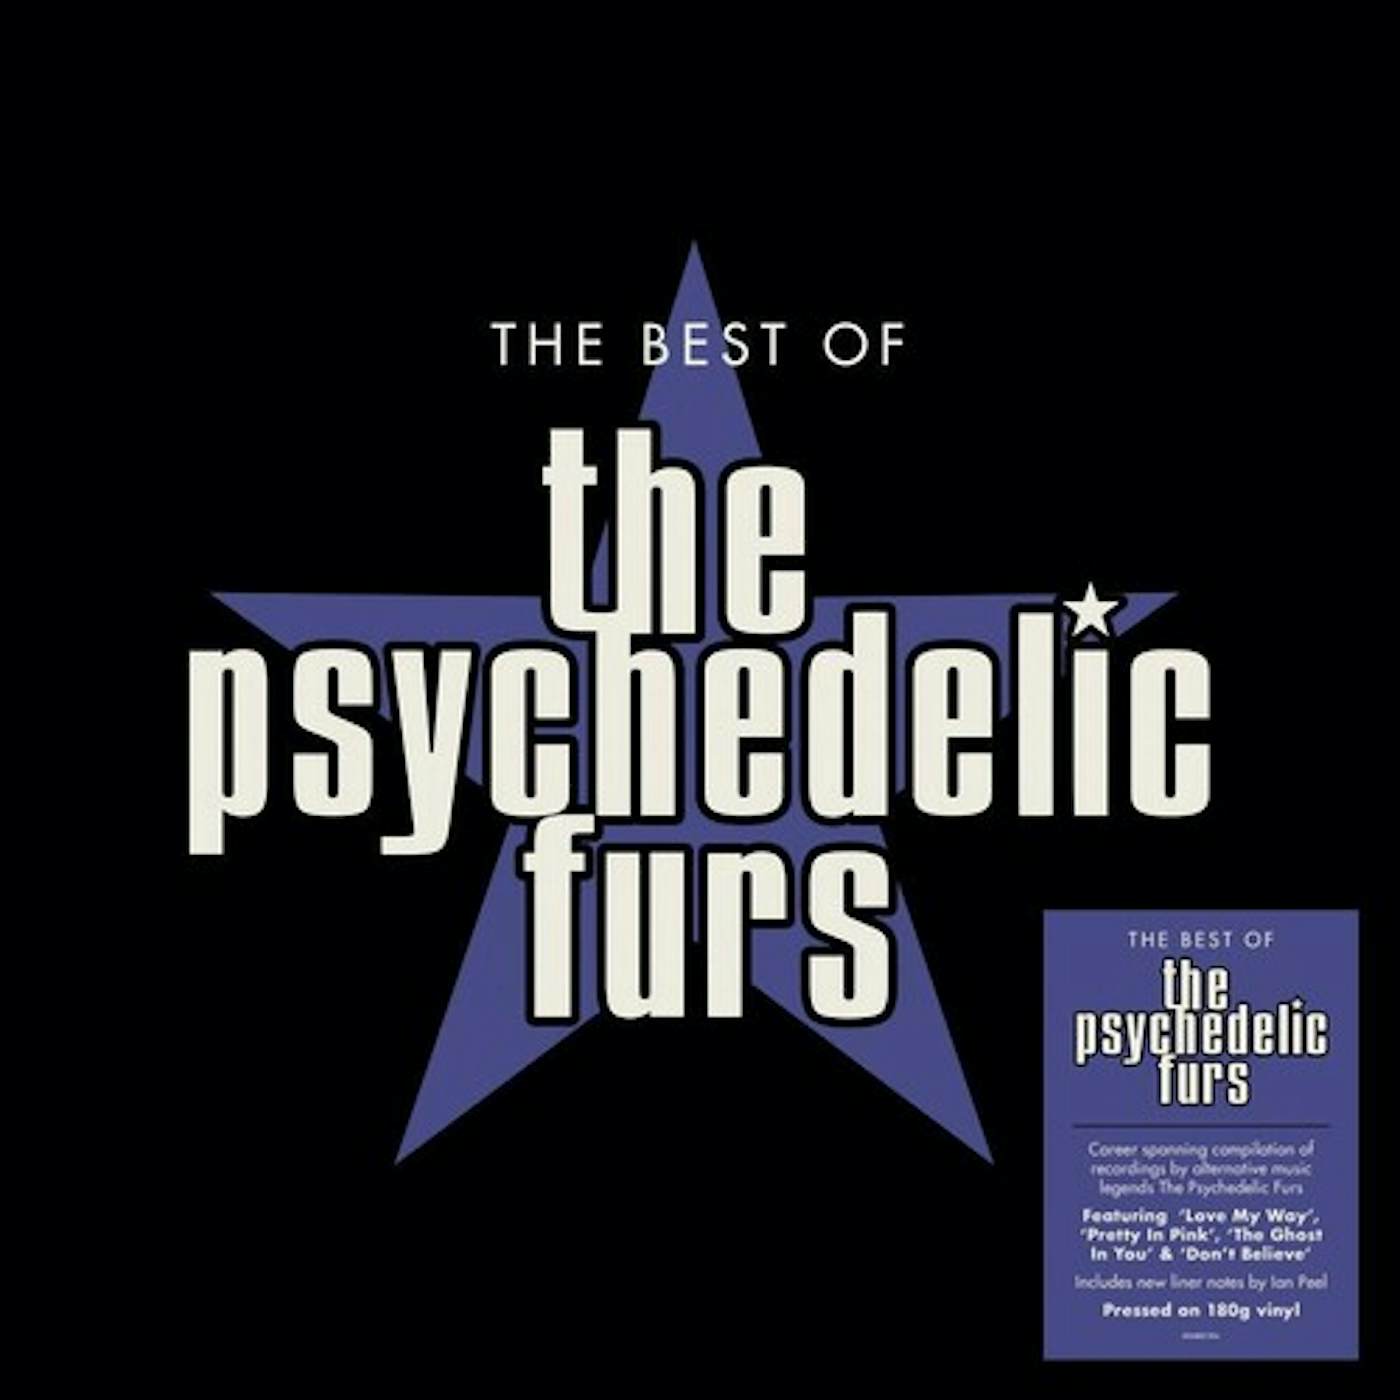 The Psychedelic Furs BEST OF Vinyl Record